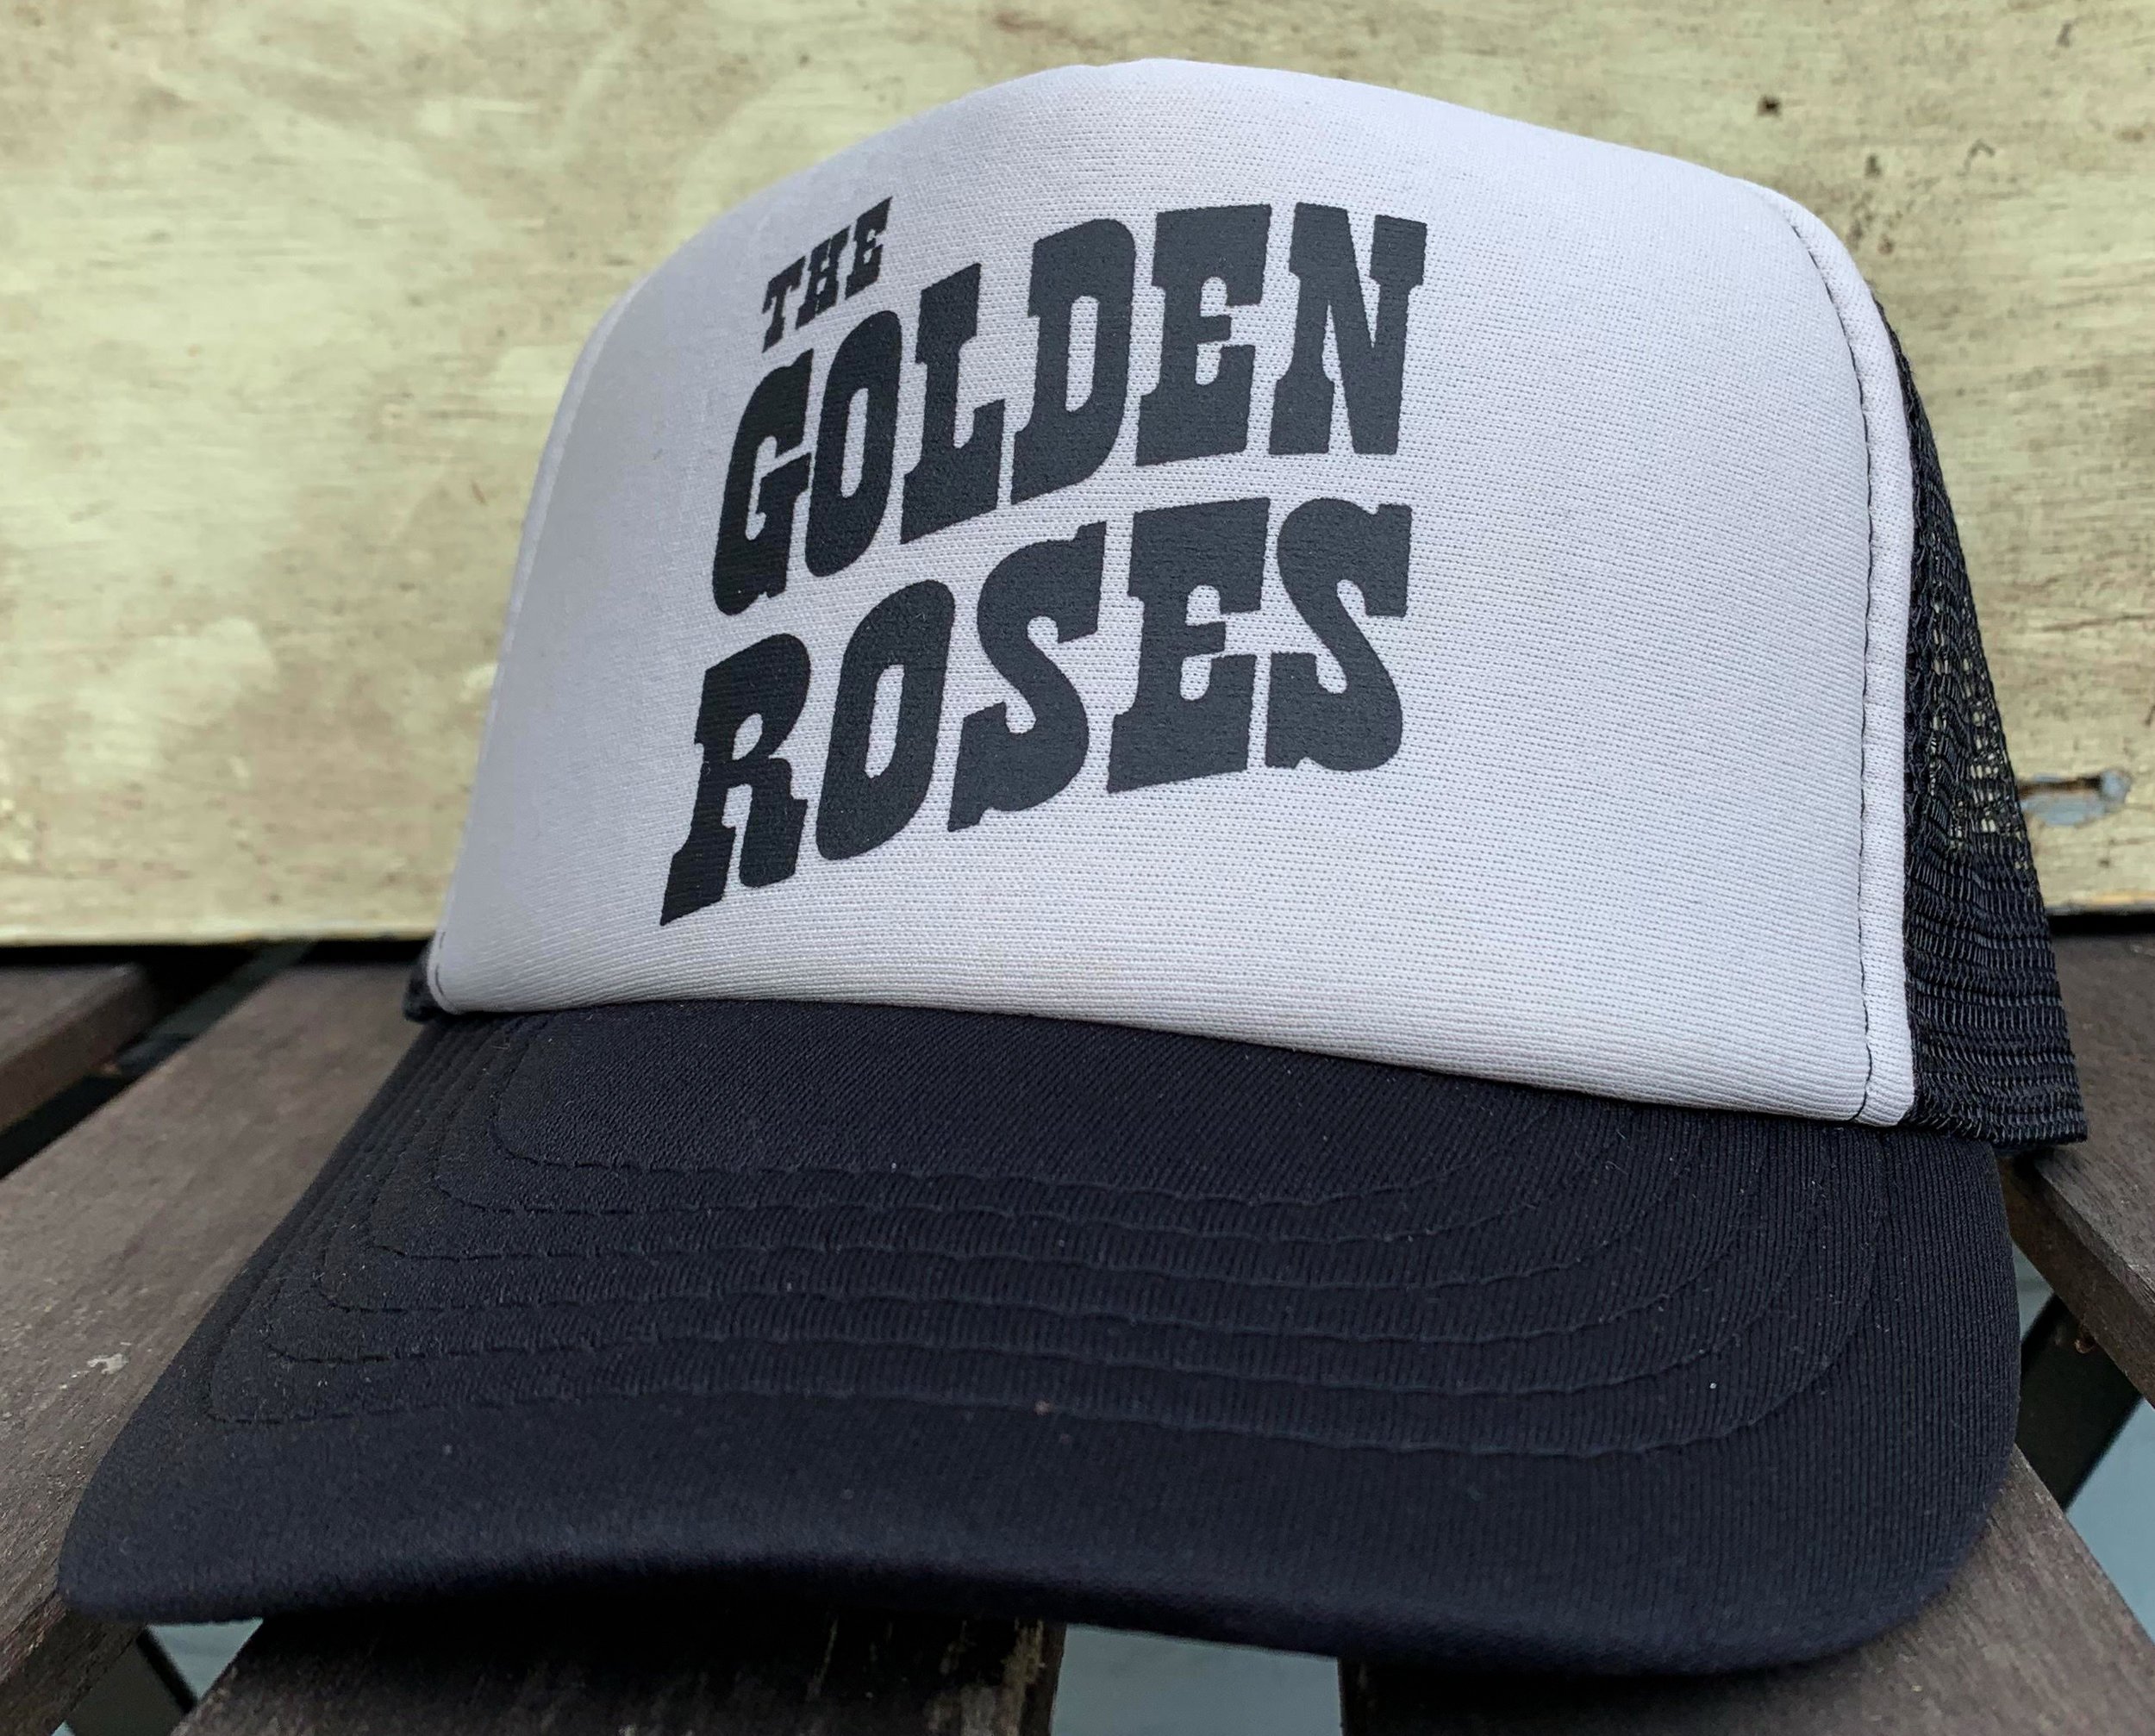 Store — THE GOLDEN ROSES